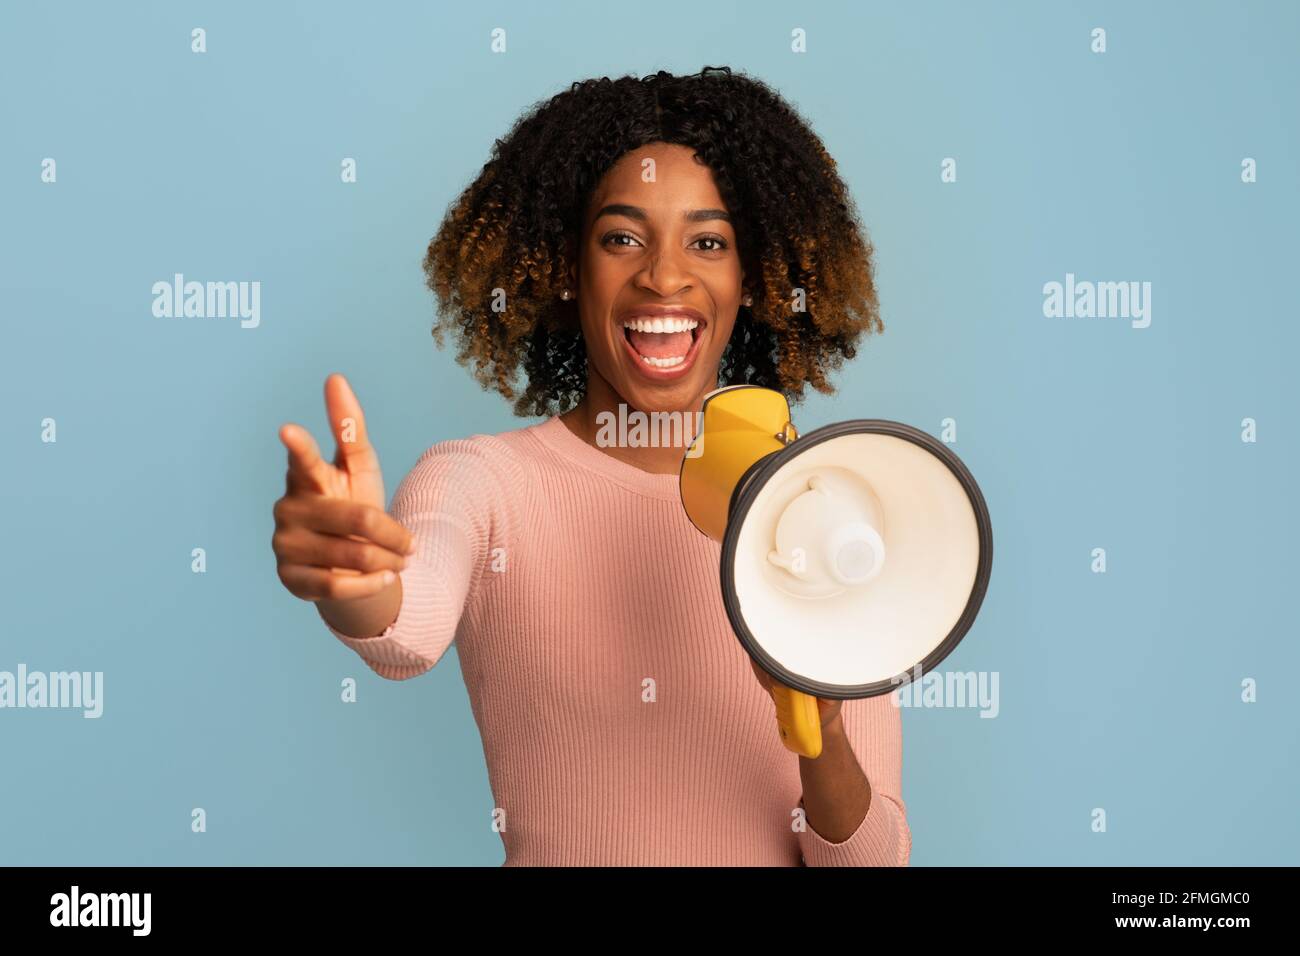 Emotional Cheerful Black Woman Making Announcement With Megaphone In Hands Stock Photo